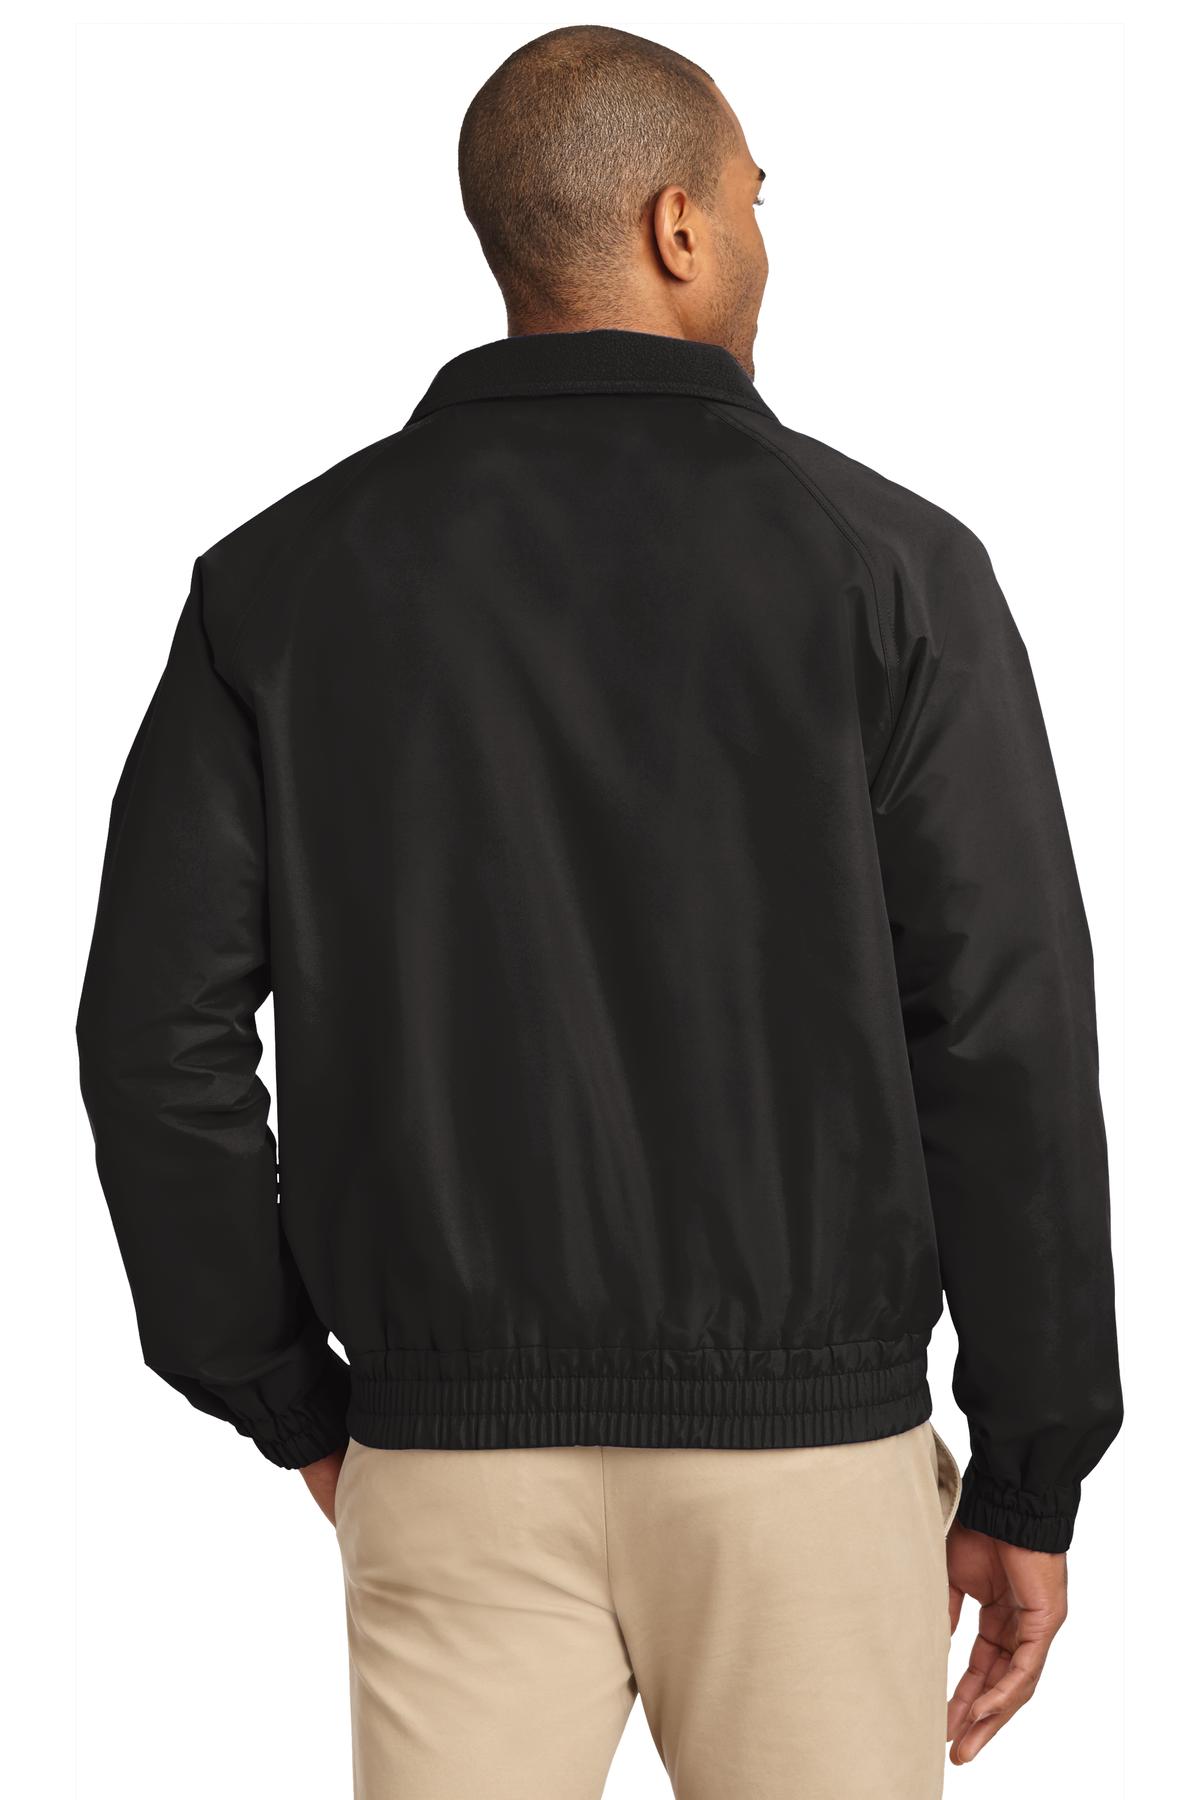 Port Authority Lightweight Charger Jacket-XL (True Black) - image 2 of 5